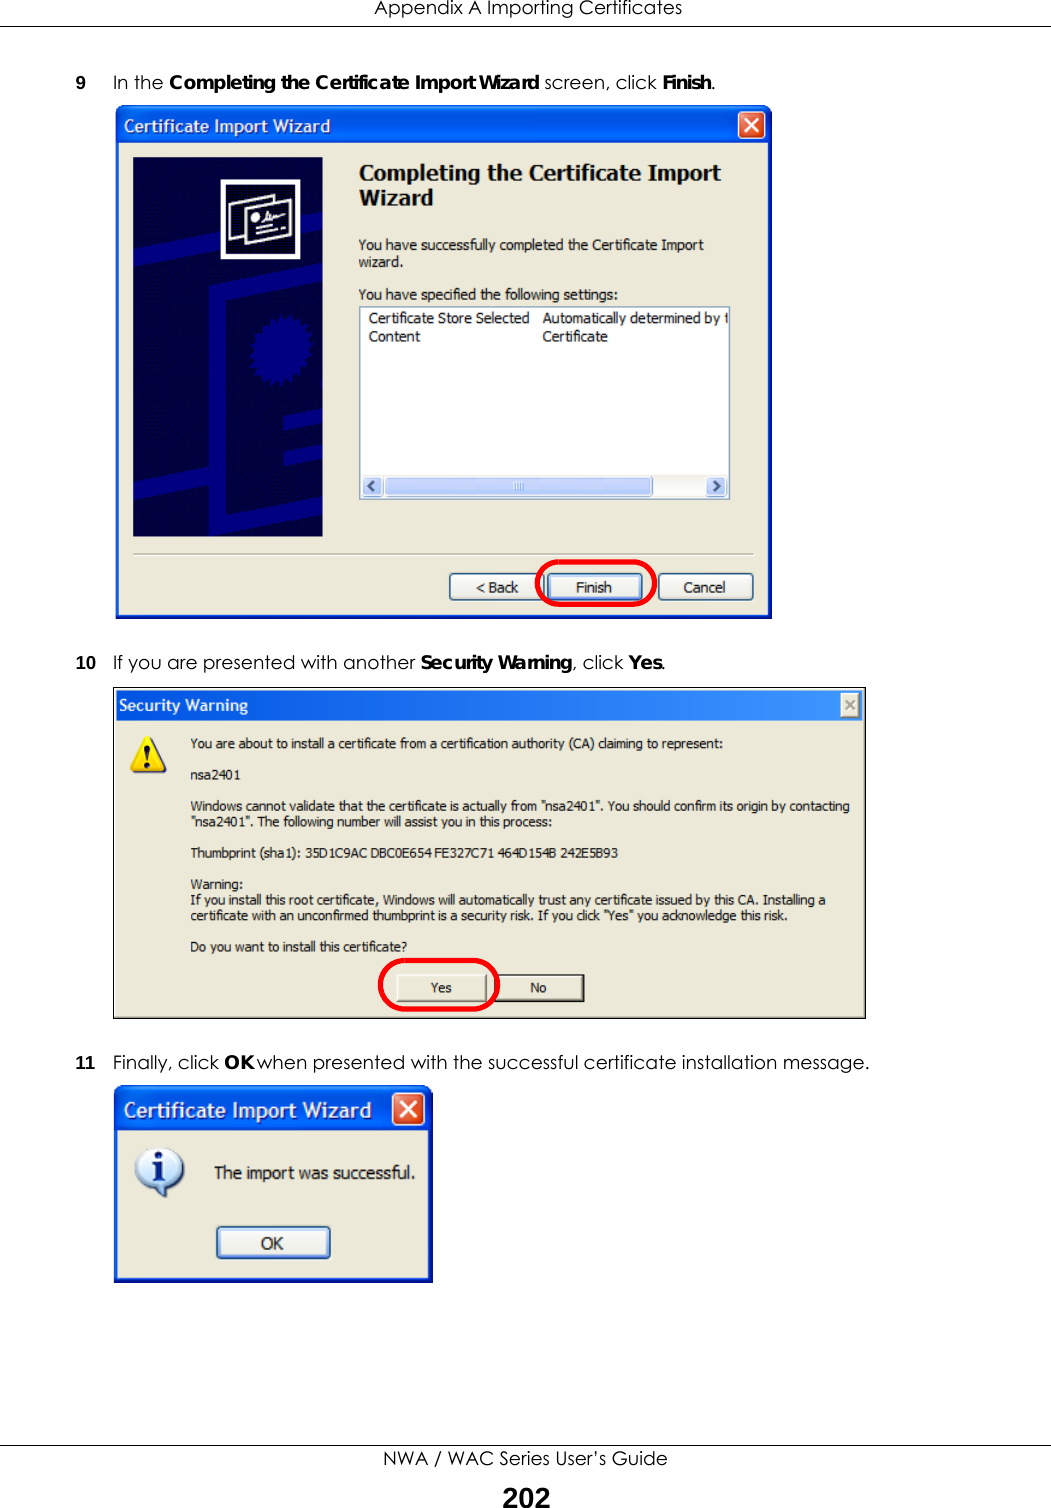  Appendix A Importing CertificatesNWA / WAC Series User’s Guide2029In the Completing the Certificate Import Wizard screen, click Finish.10 If you are presented with another Security Warning, click Yes.11 Finally, click OK when presented with the successful certificate installation message.